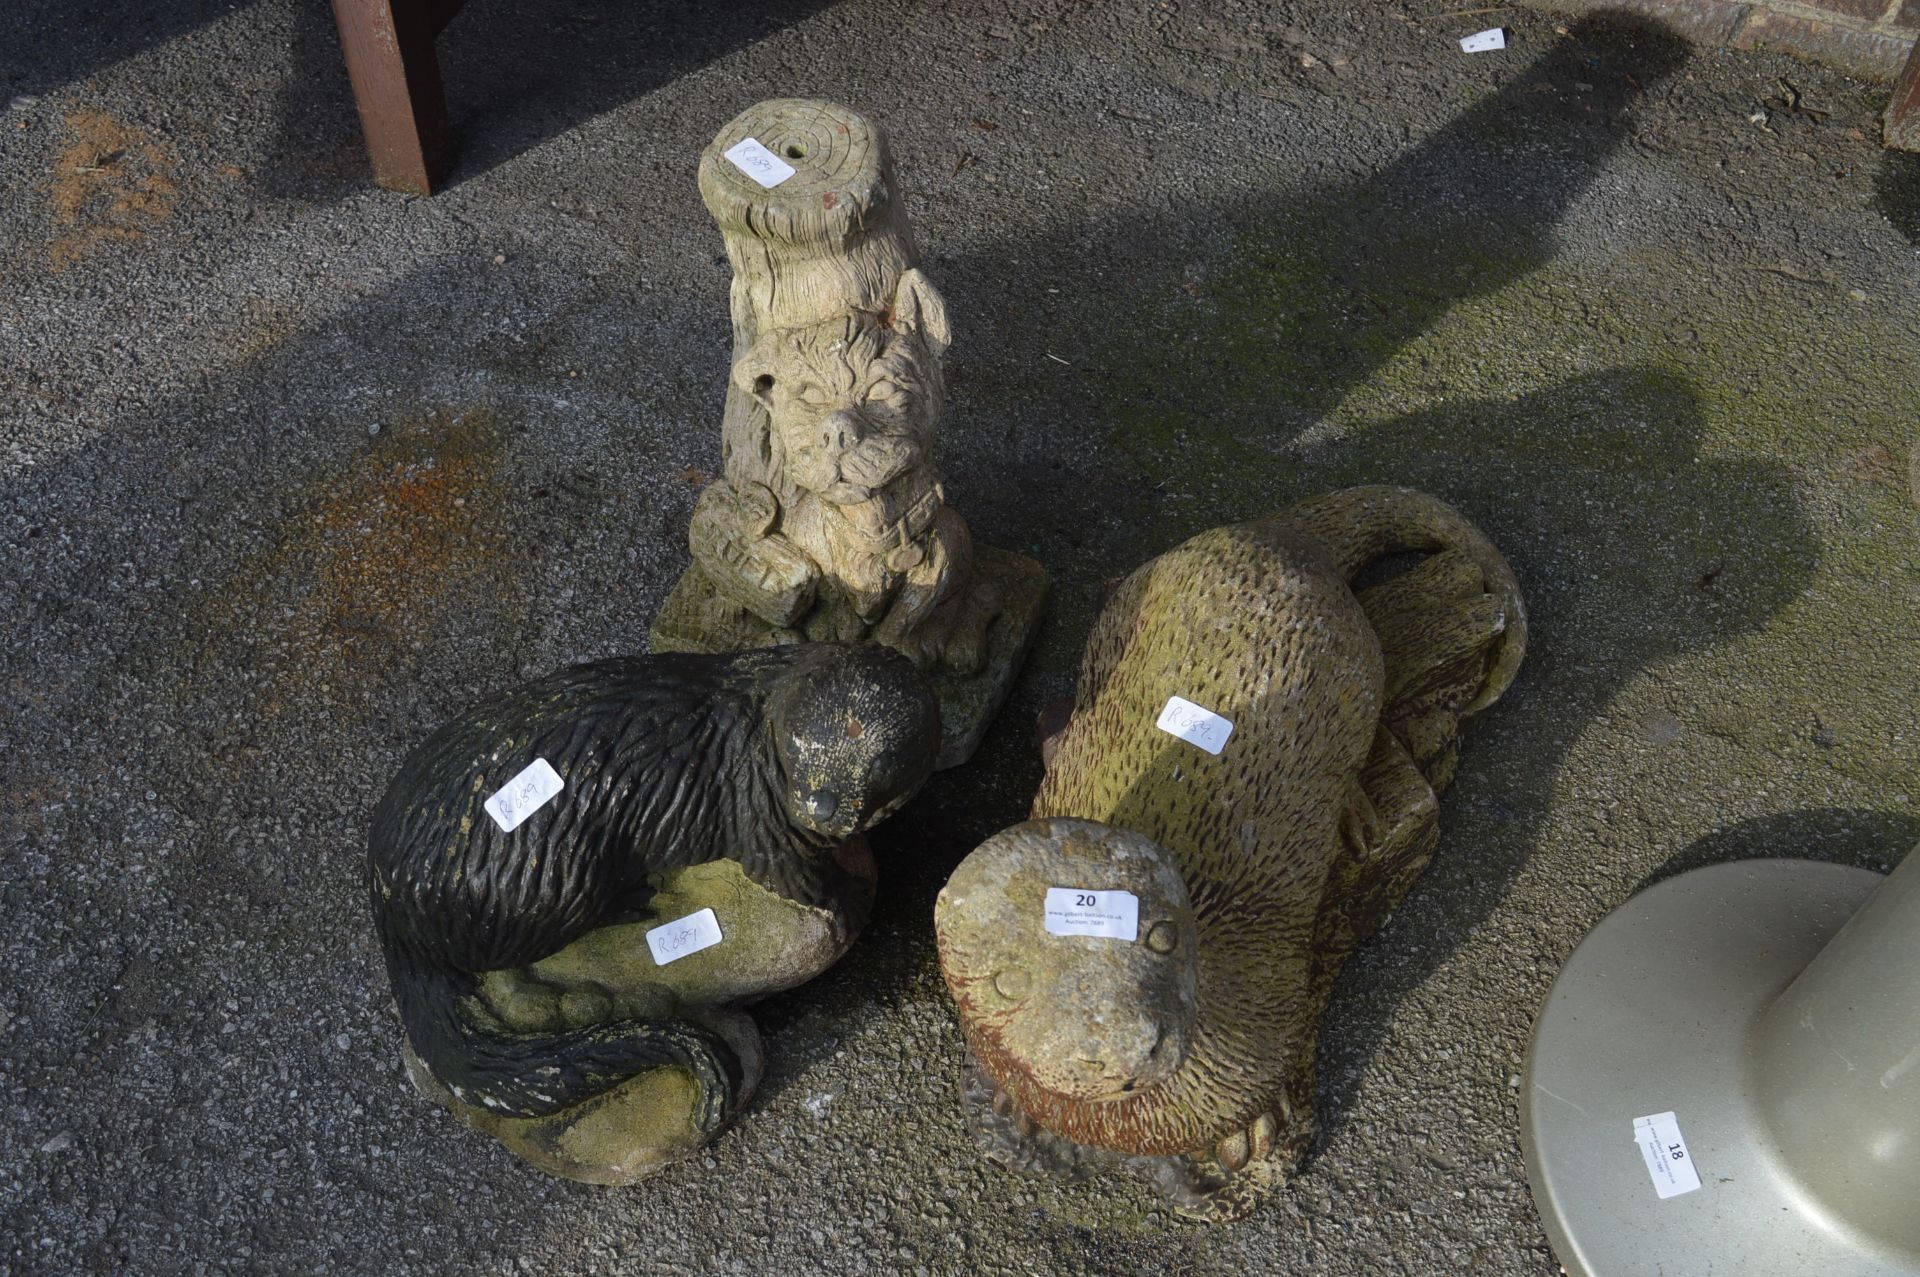 Concrete Garden Ornaments - Otters and Scotty Dog